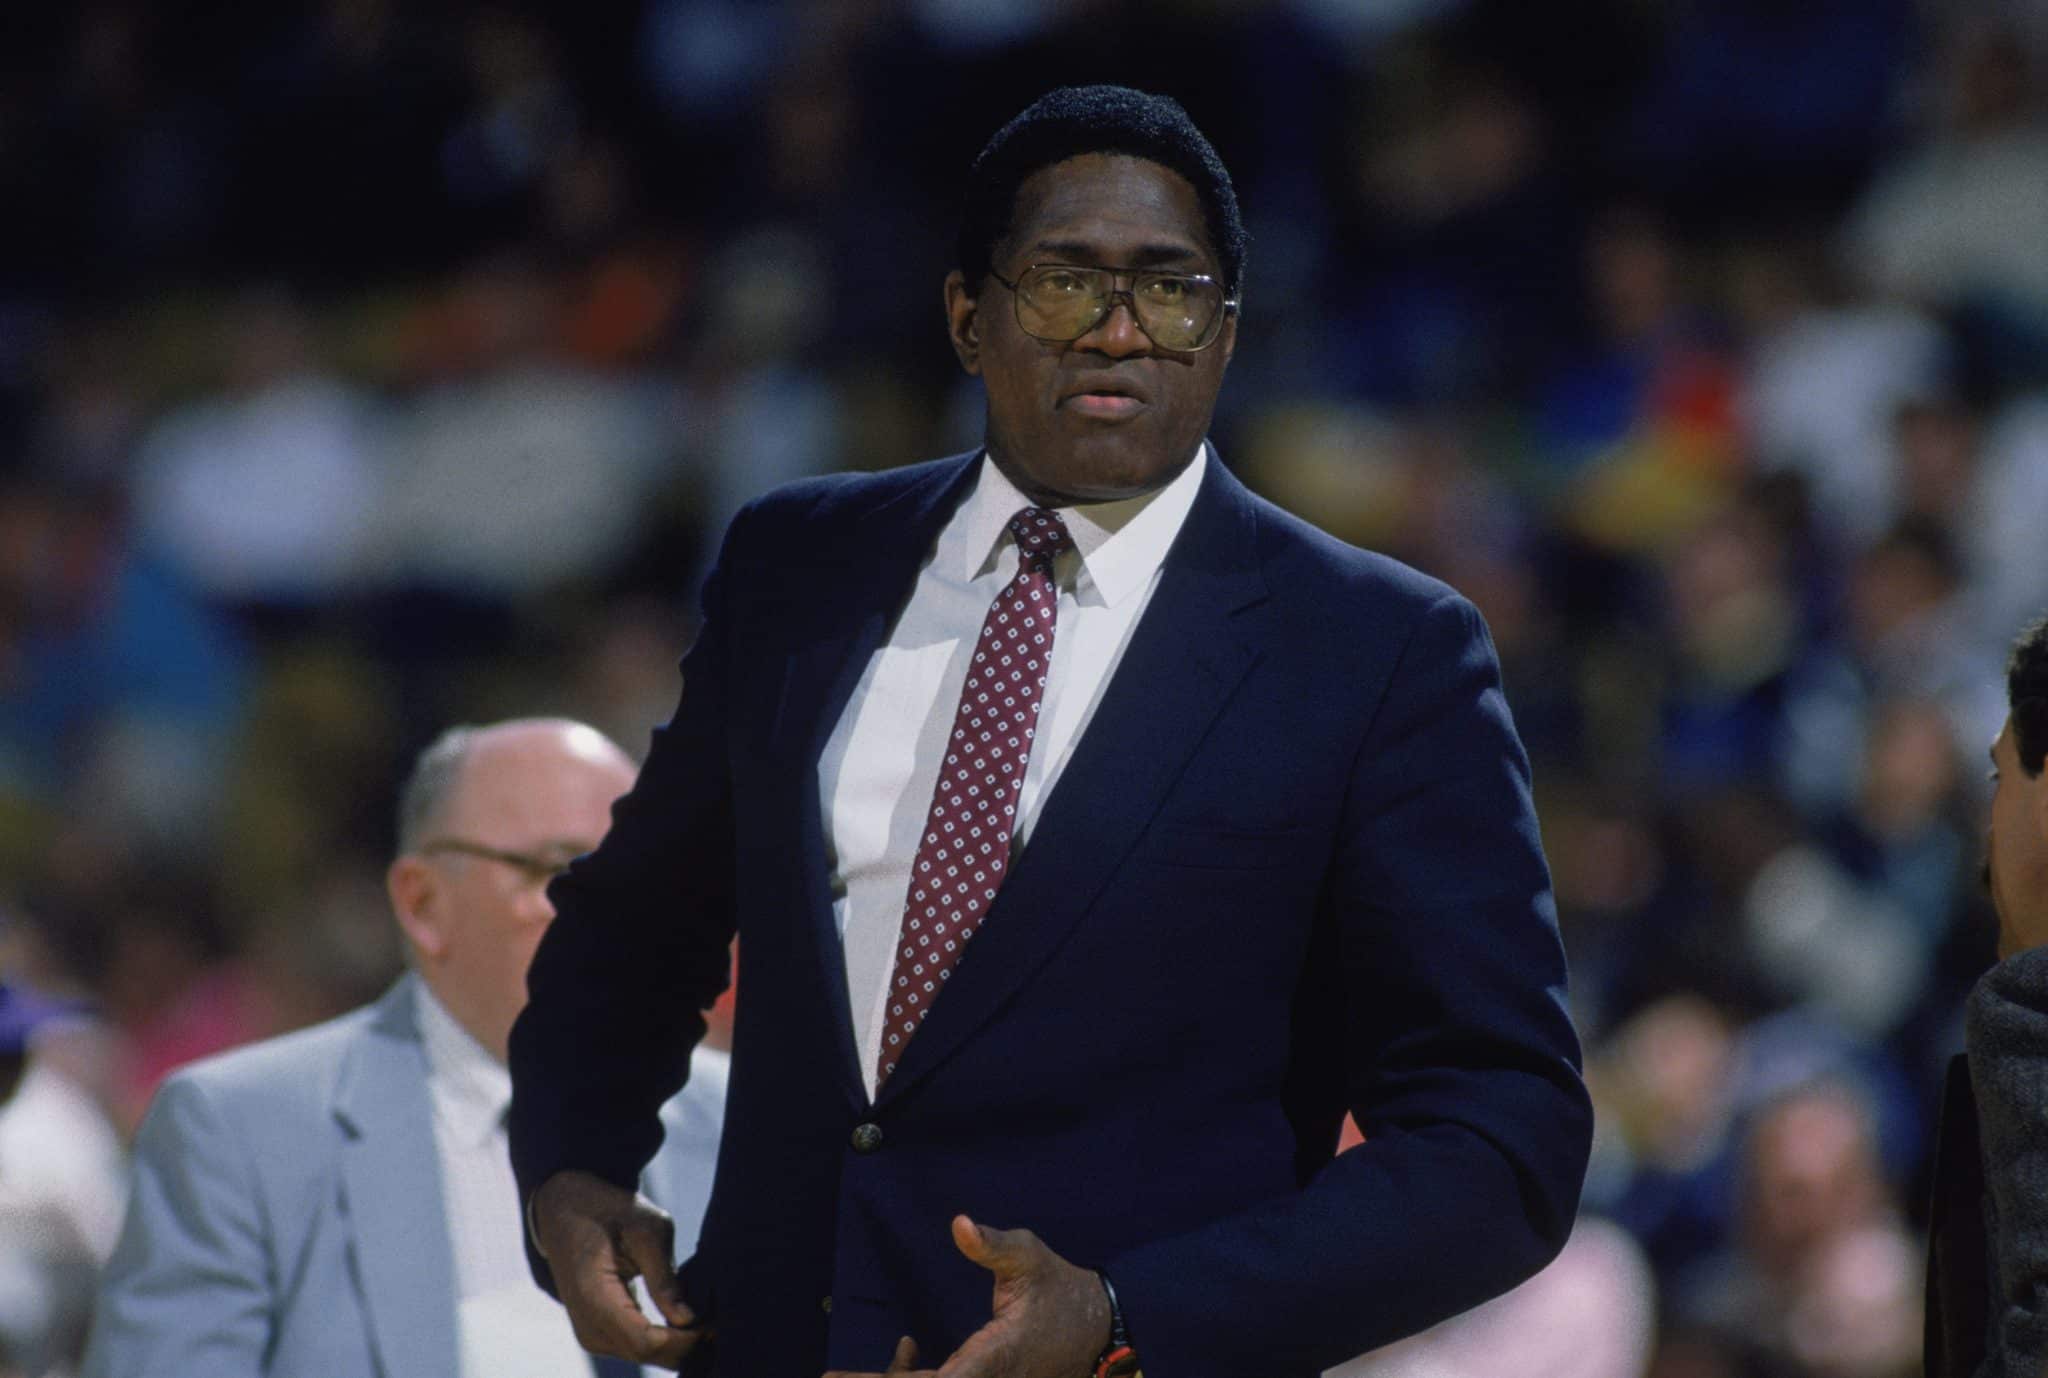 LOS ANGELES - 1989: Head Coach Willis Reed of the New Jersey Nets stands on the sideline during the NBA game against the Los Angeles Lakers at the Great Western Forum in Los Angeles, California in 1989. NOTE TO USER: User expressly acknowledges and agrees that, by downloading and/or using this Photograph, User is consenting to the terms and conditions of the Getty Images License Agreement. Mandatory copyright notice : Copyright 1989 NBAE.